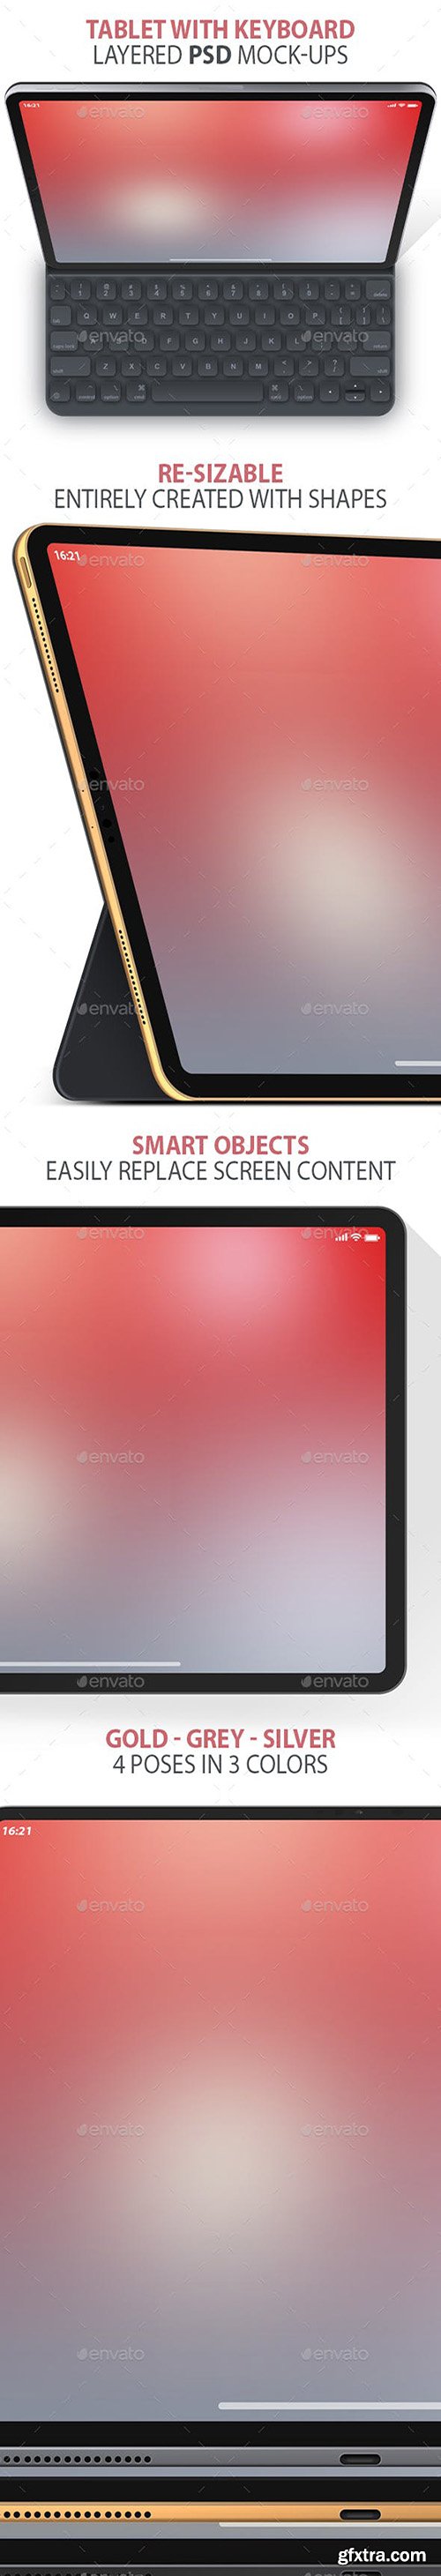 Clean Tablet Layered PSD Mock-ups 23086943